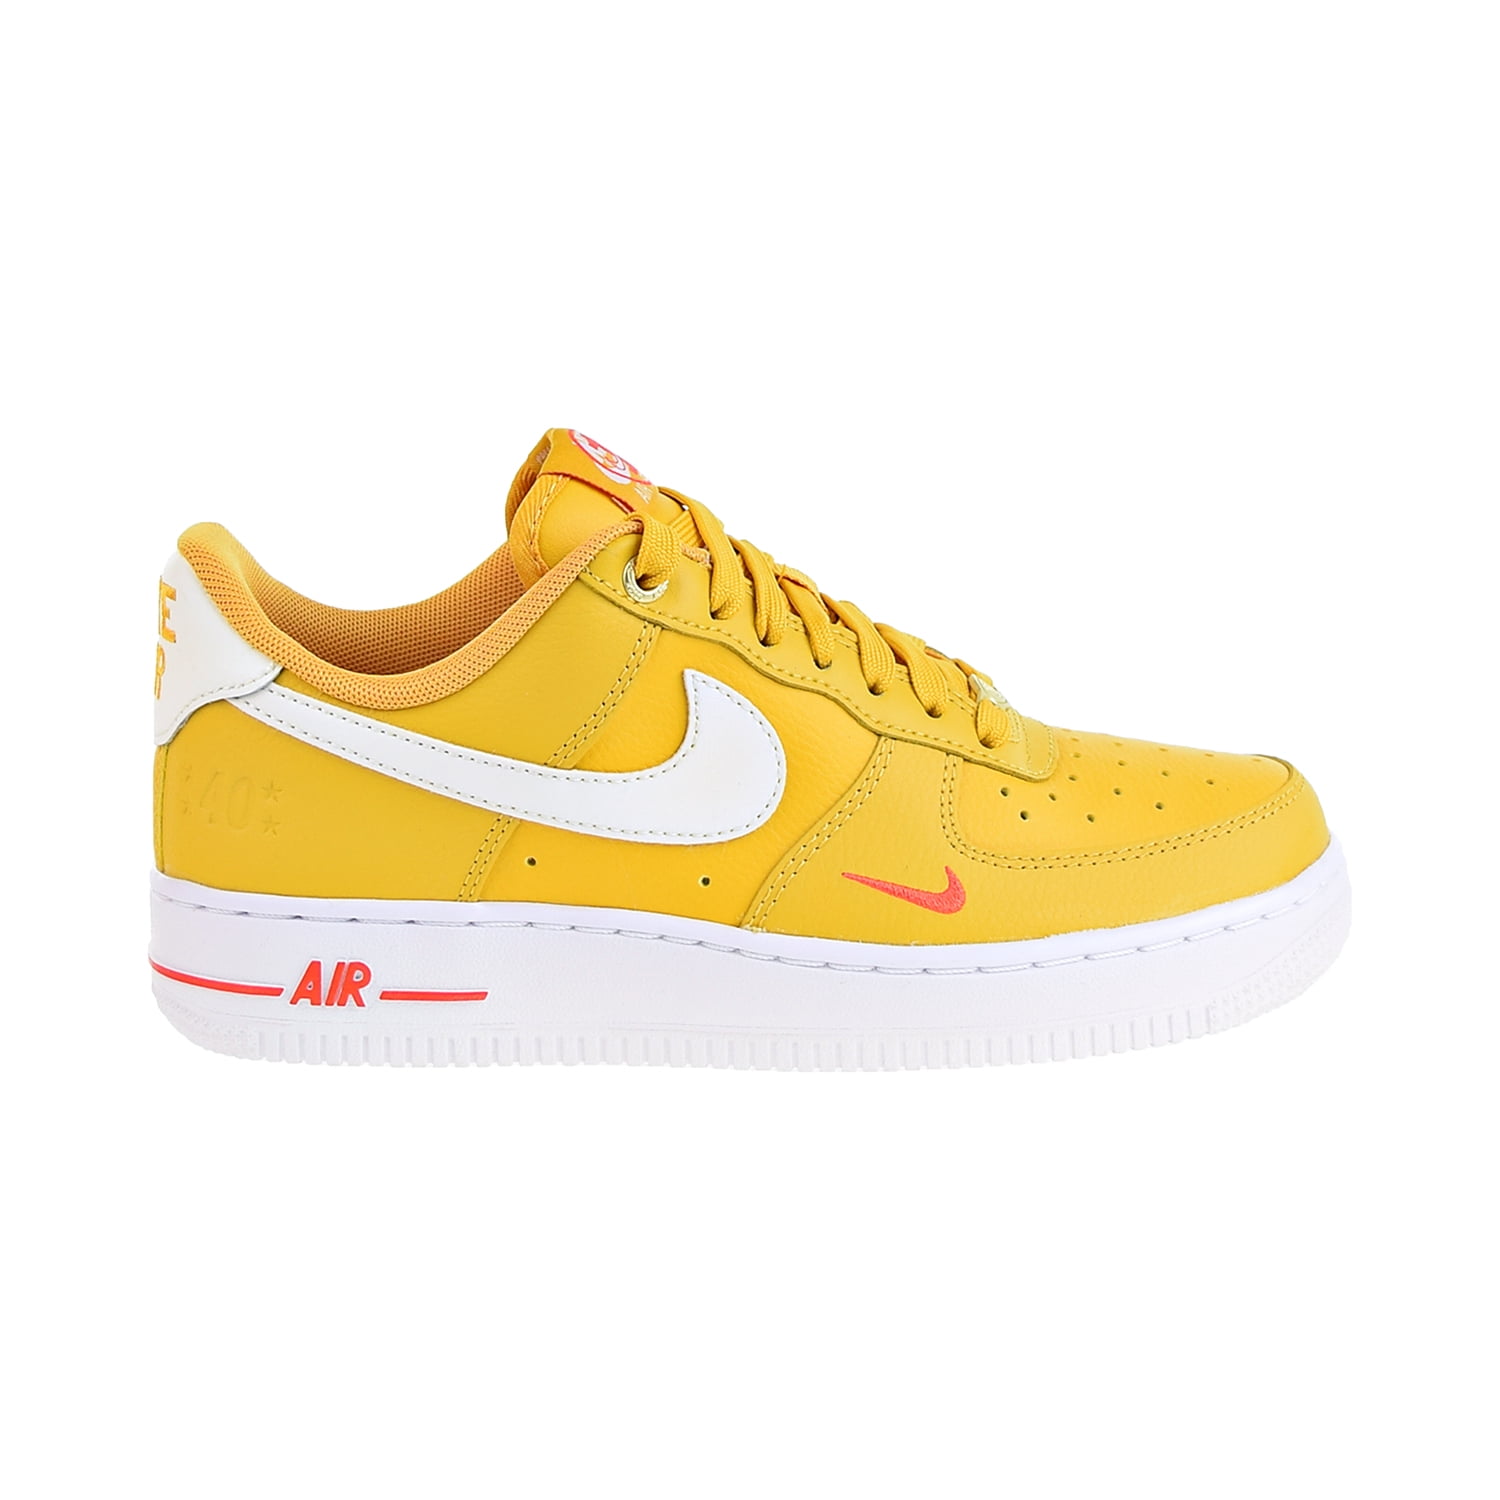 Nike Air Force 1 '07 Low SE Women's Shoes Yellow Ochre-Sail-White dq7582-700, Size: 6.5